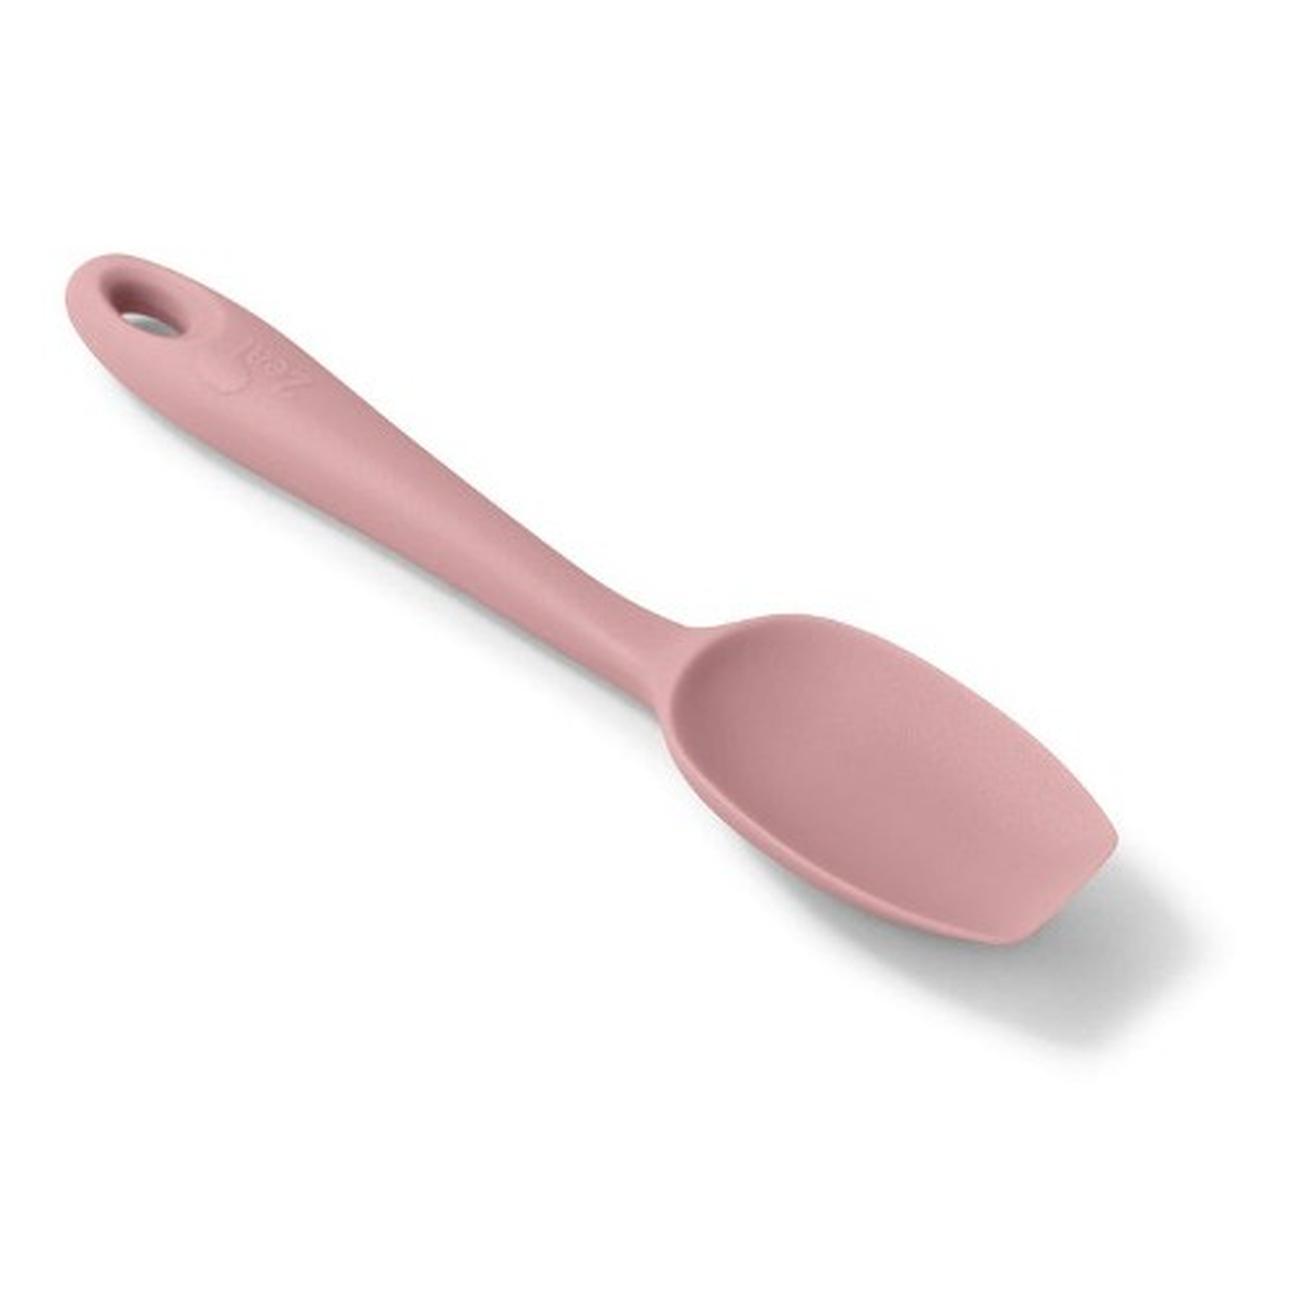 zeal-spatula-spoon-rose-silicone-20cm - Zeal Silicone Spatula Spoon Rose Small